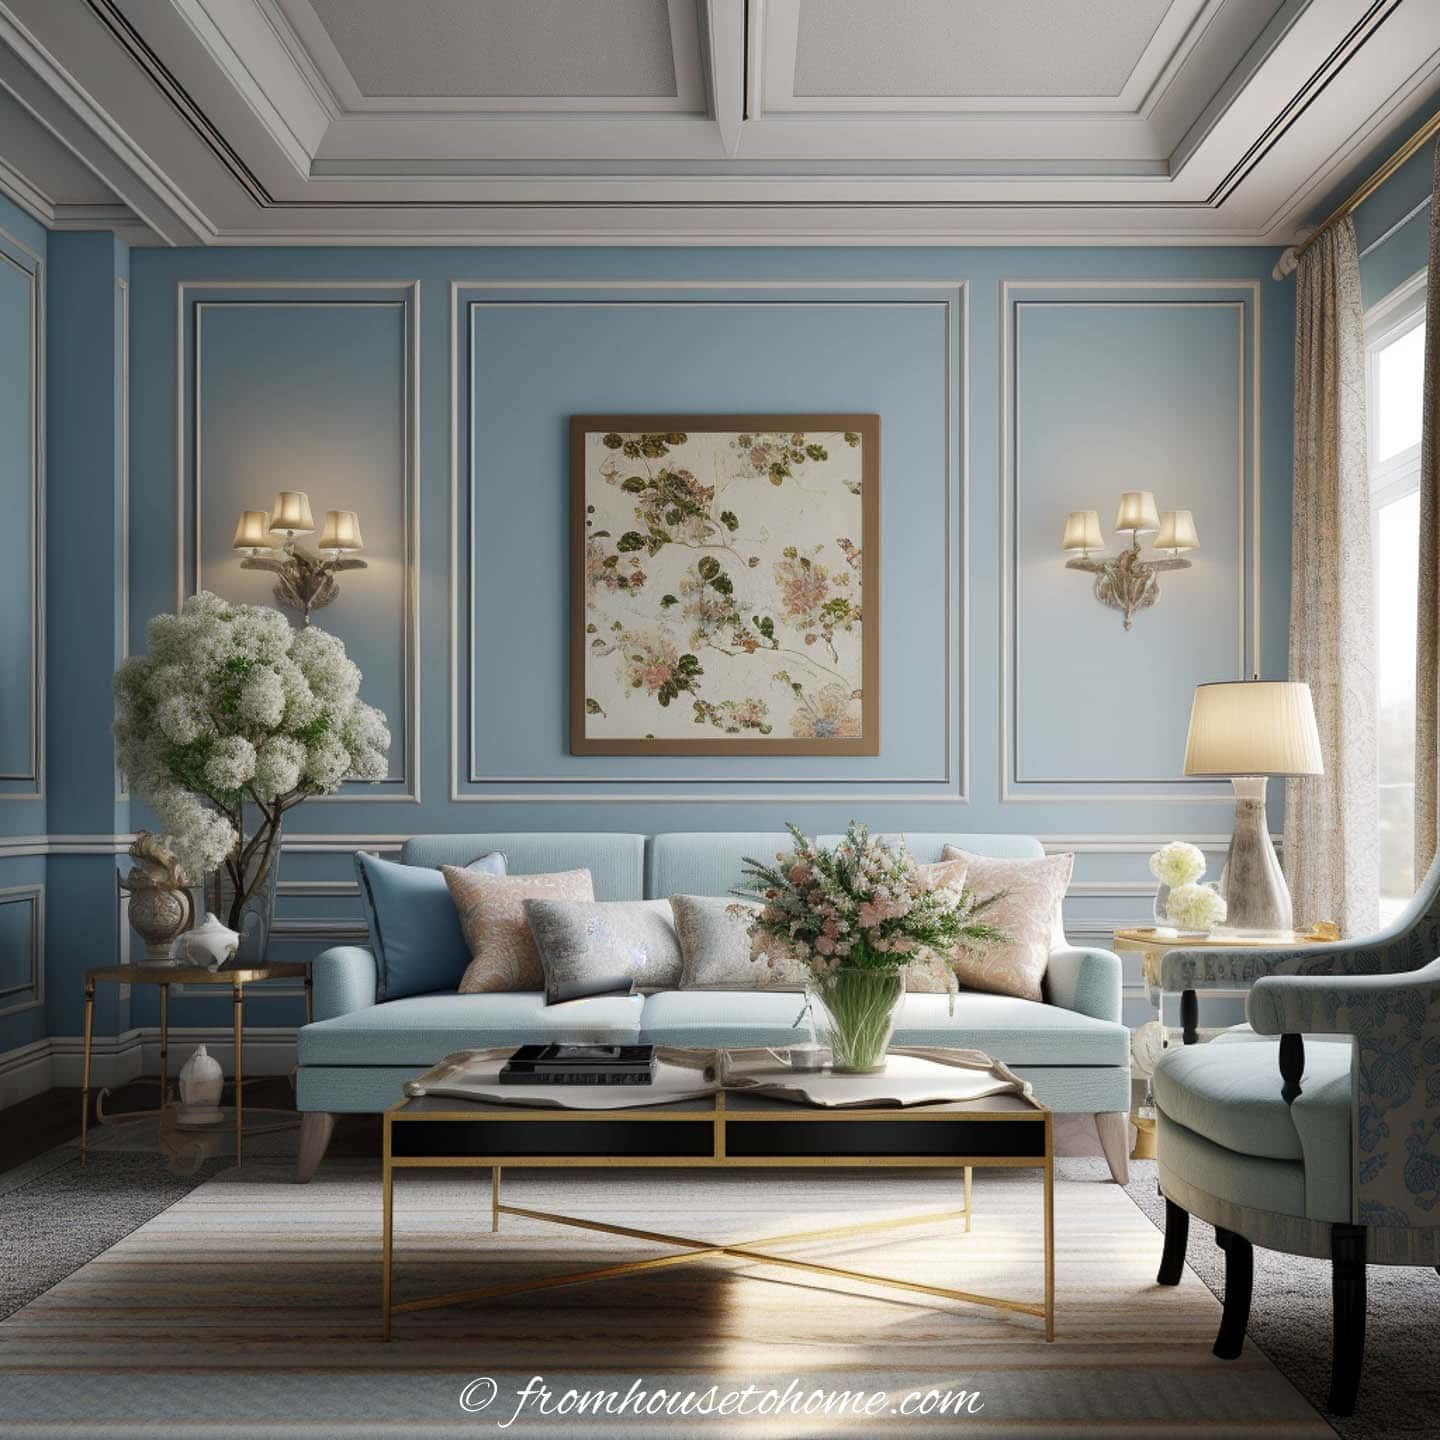 Finding Tranquility: Creating a Serene
Light Blue Living Room